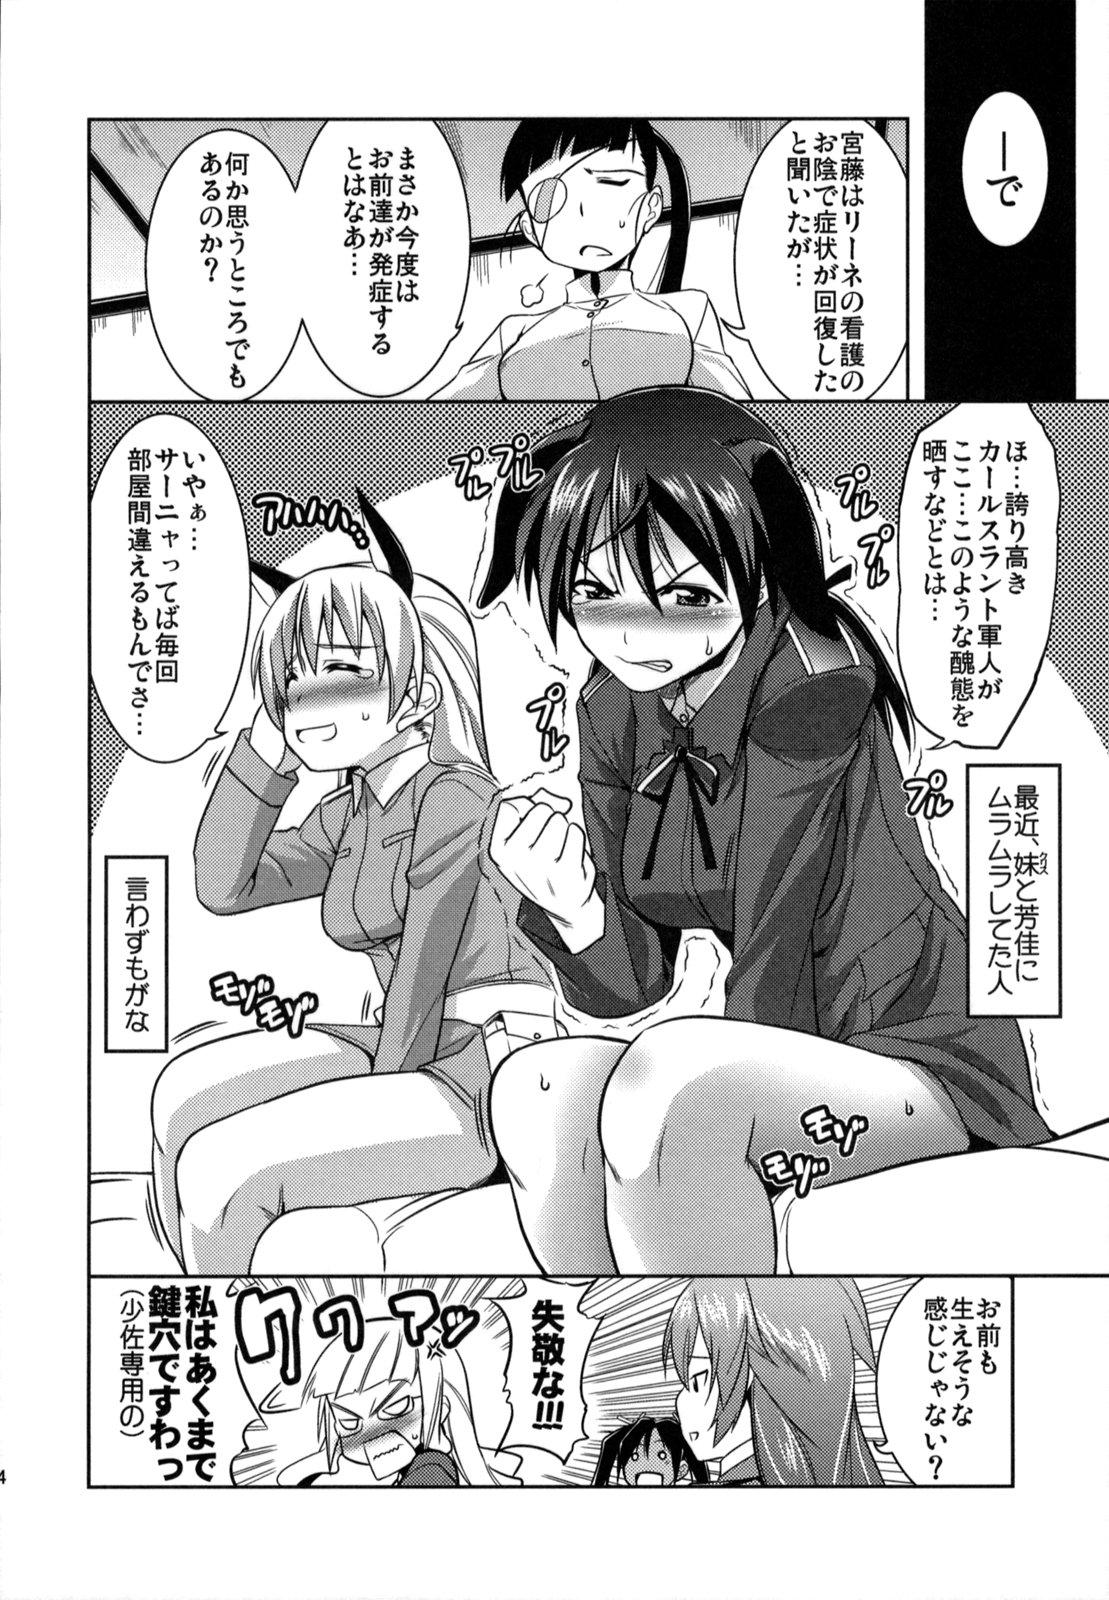 Shaking GL WITCHES - Strike witches Hardcore Fuck - Page 23